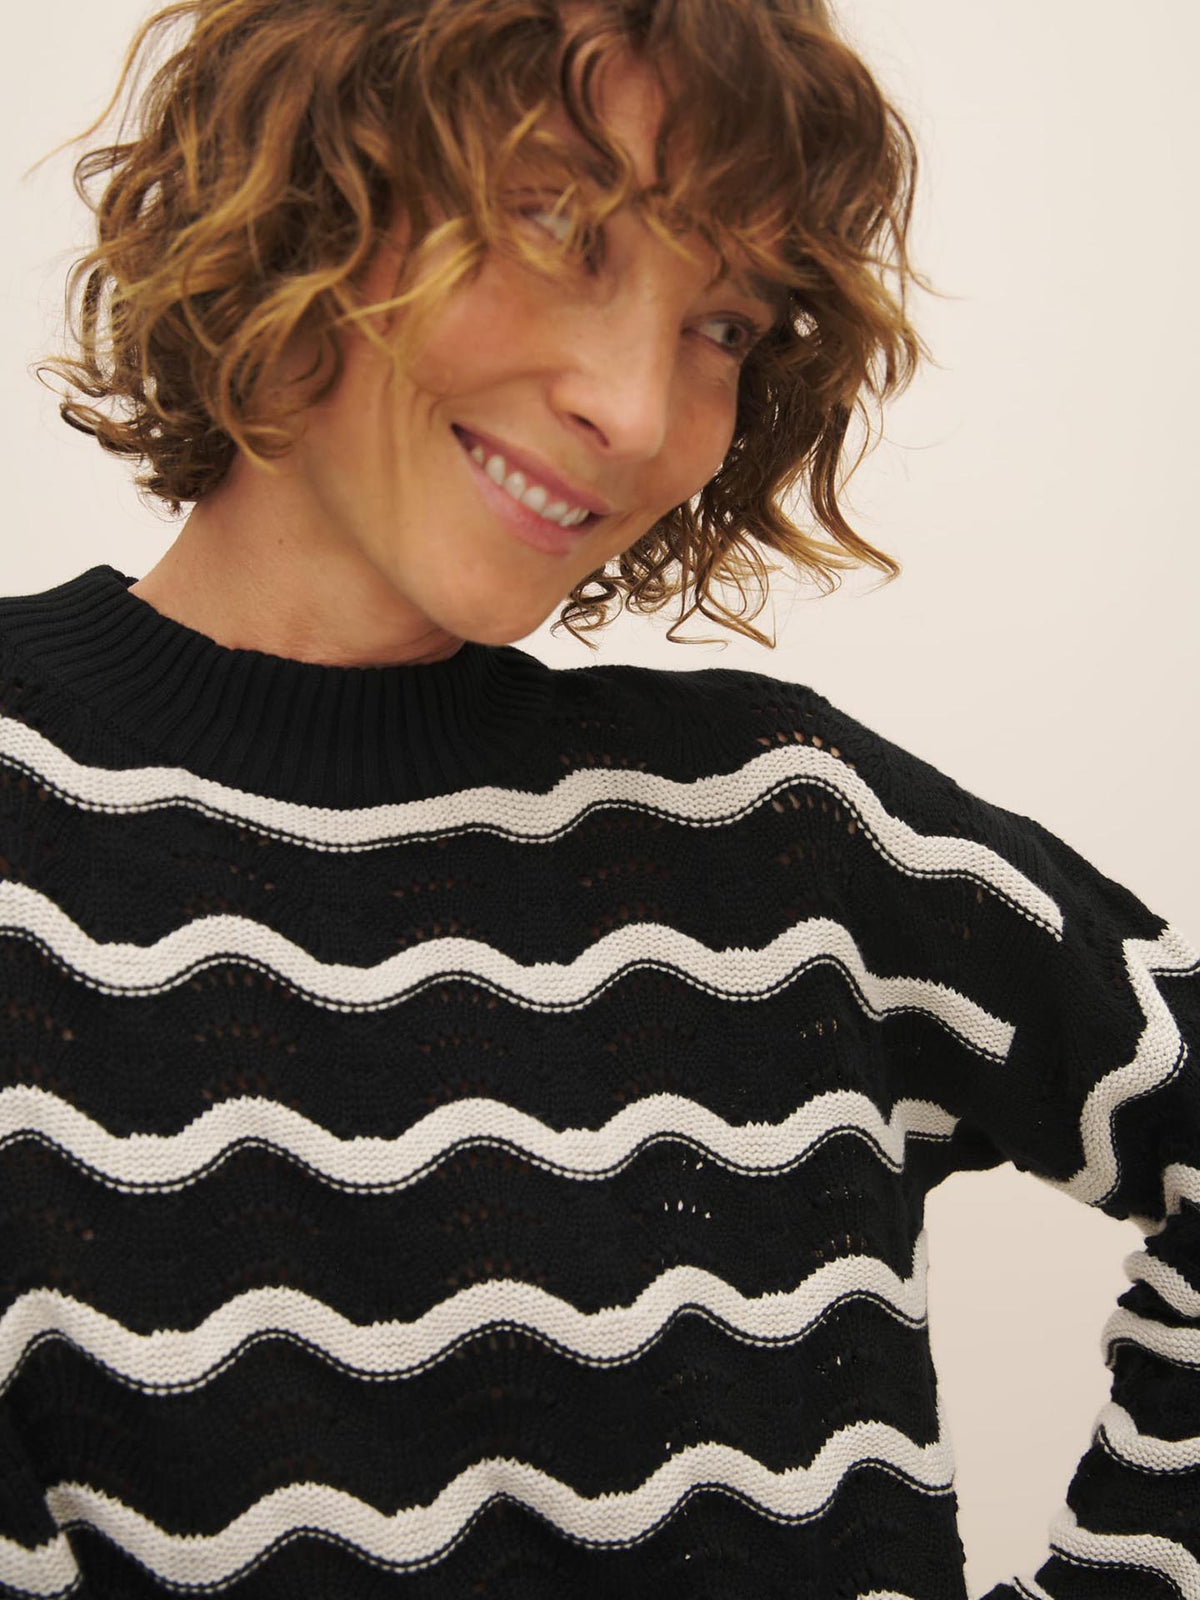 A person with curly hair smiling and wearing a Tide Jumper, a plastic-free black sweater with white wave patterns made from Fairtrade organic cotton by Kowtow.